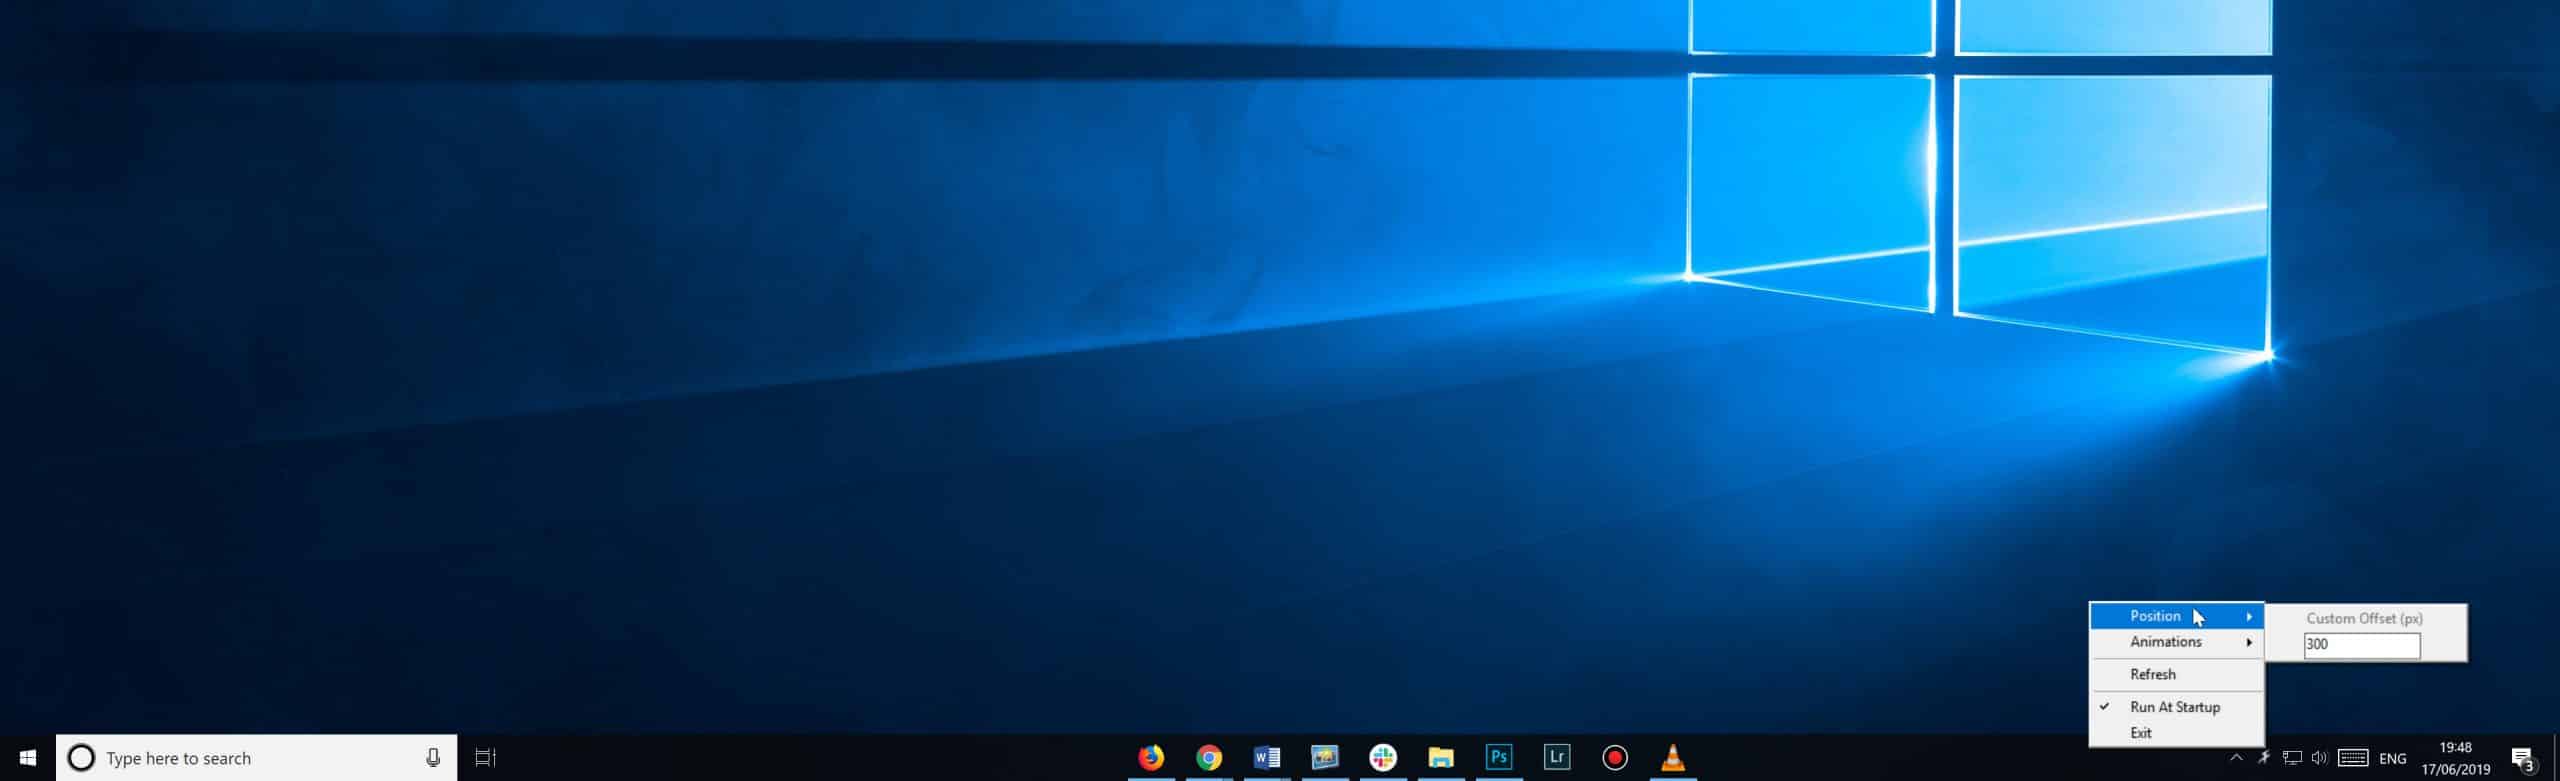 How To Move Taskbar To Middle Windows 10